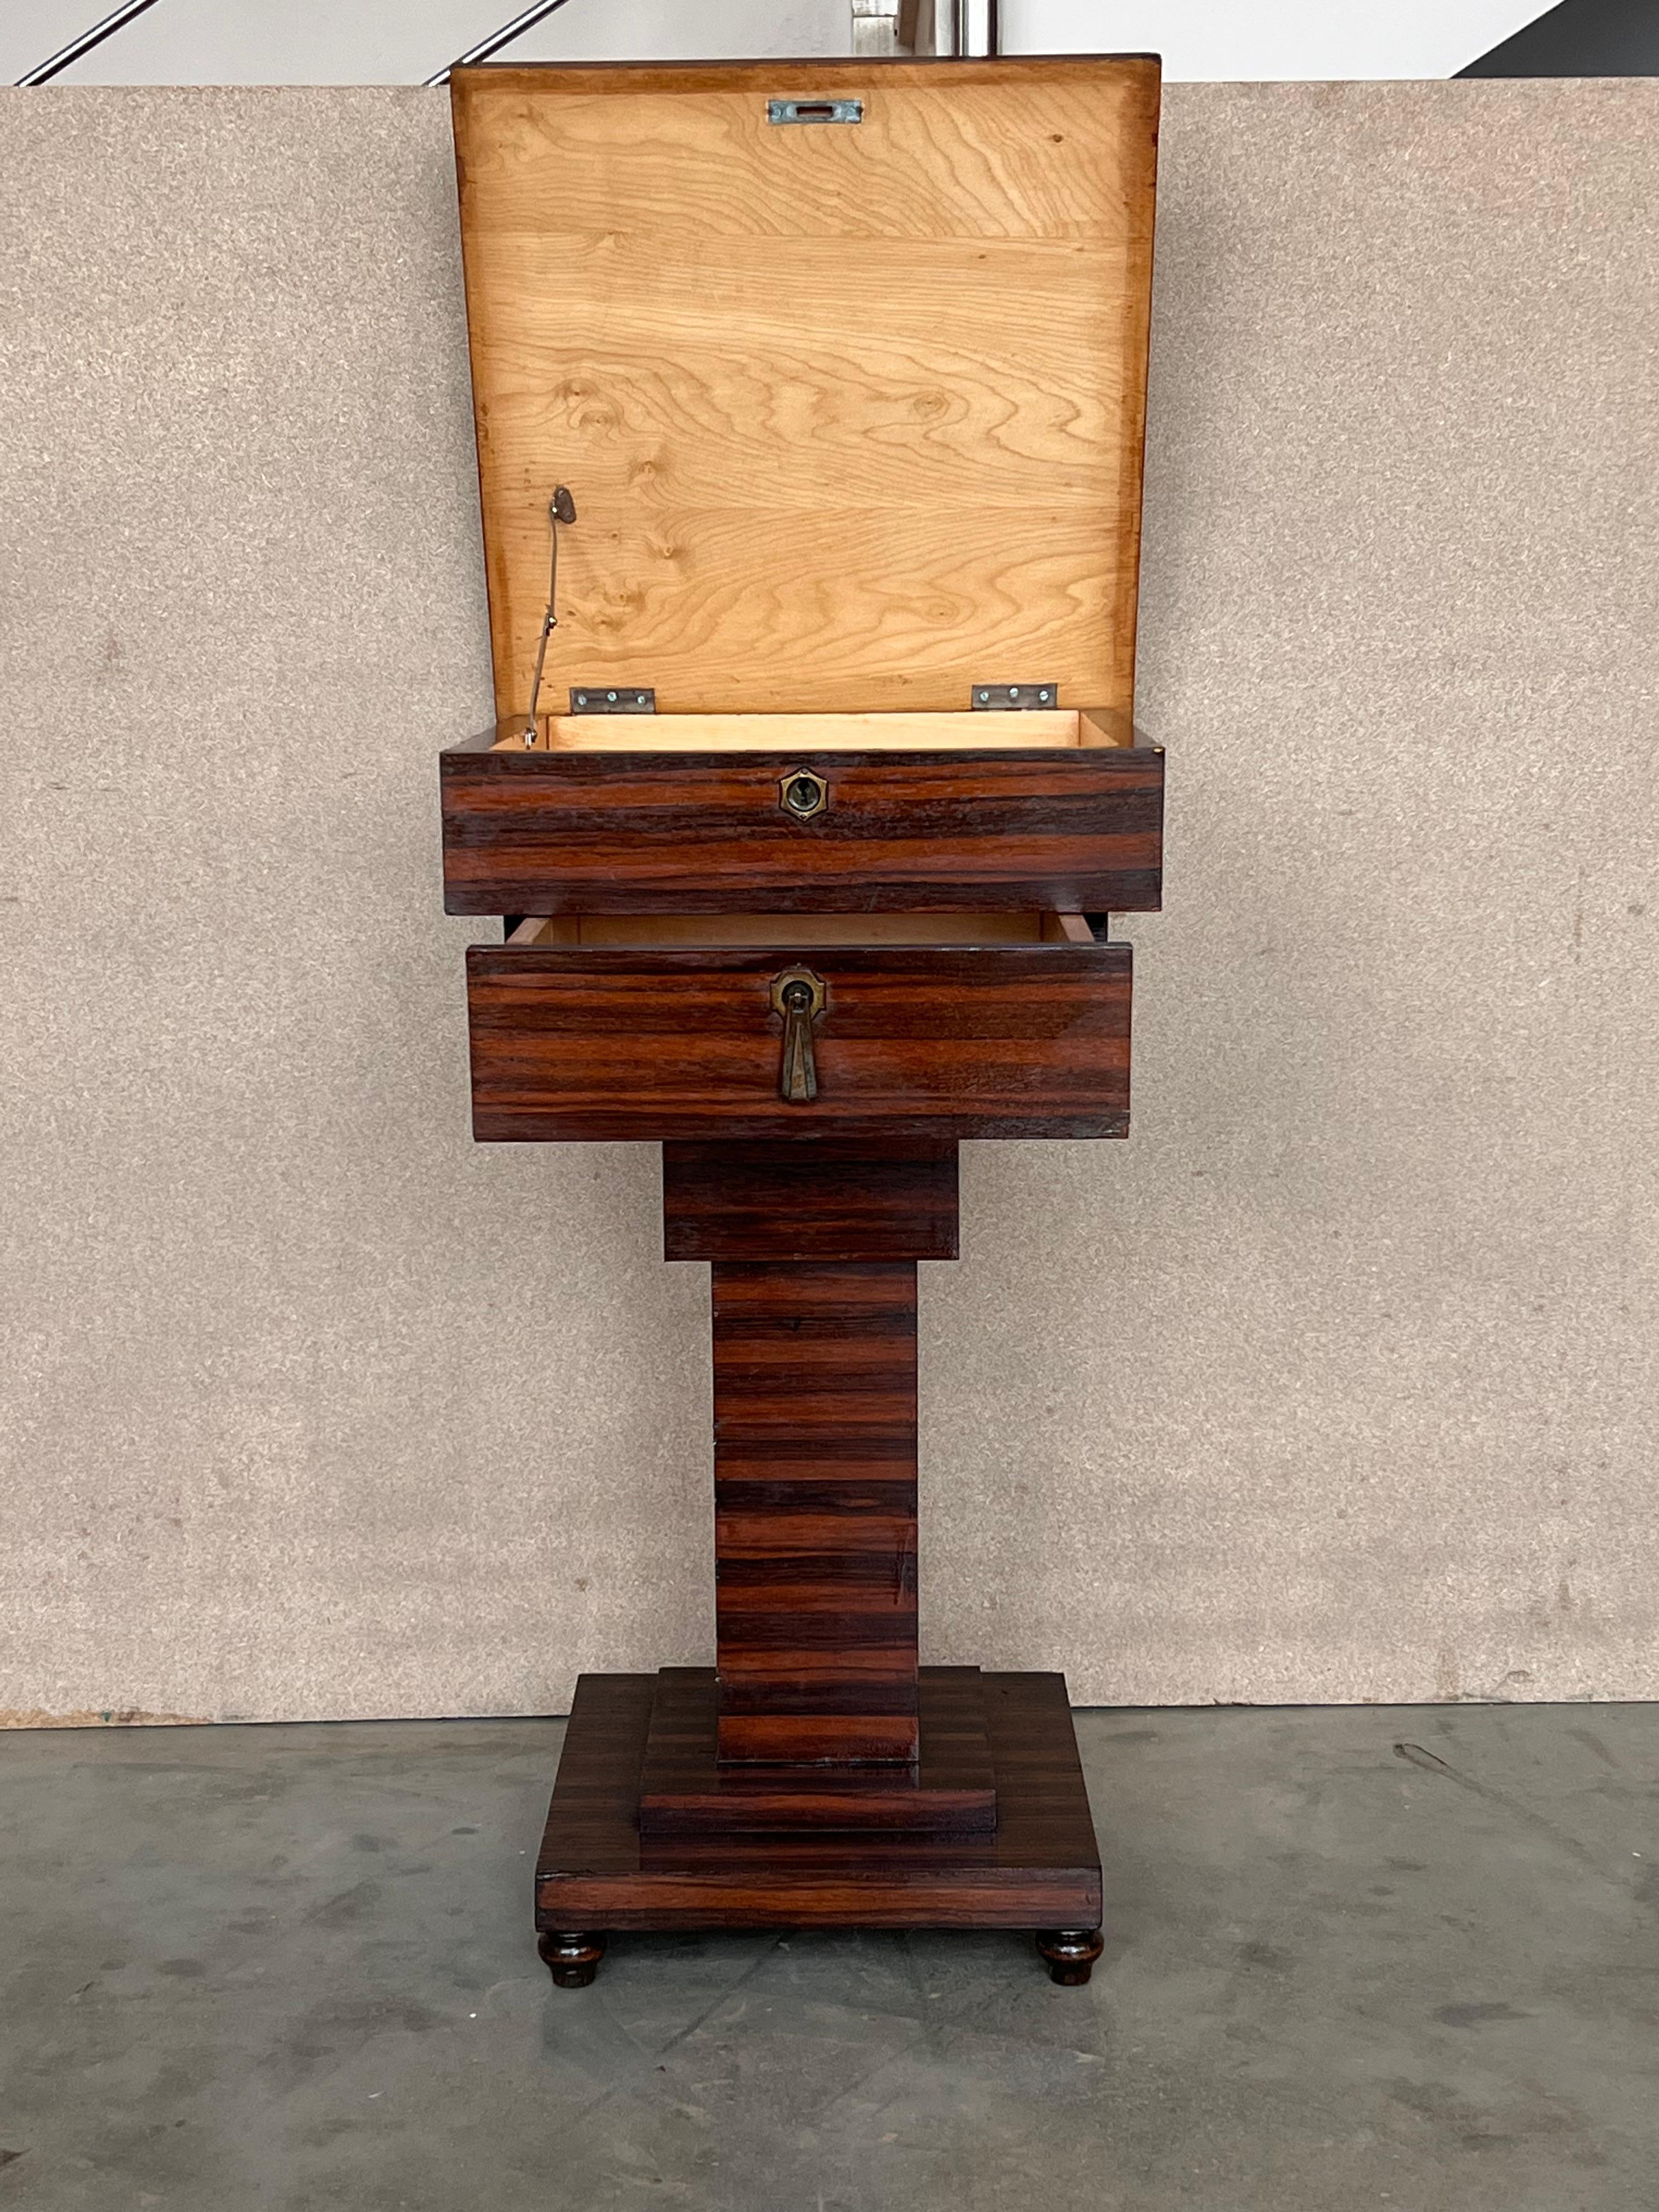 Mahogany Art Deco Sewing or Jelwery Box on Stand, circa 1860 For Sale 4